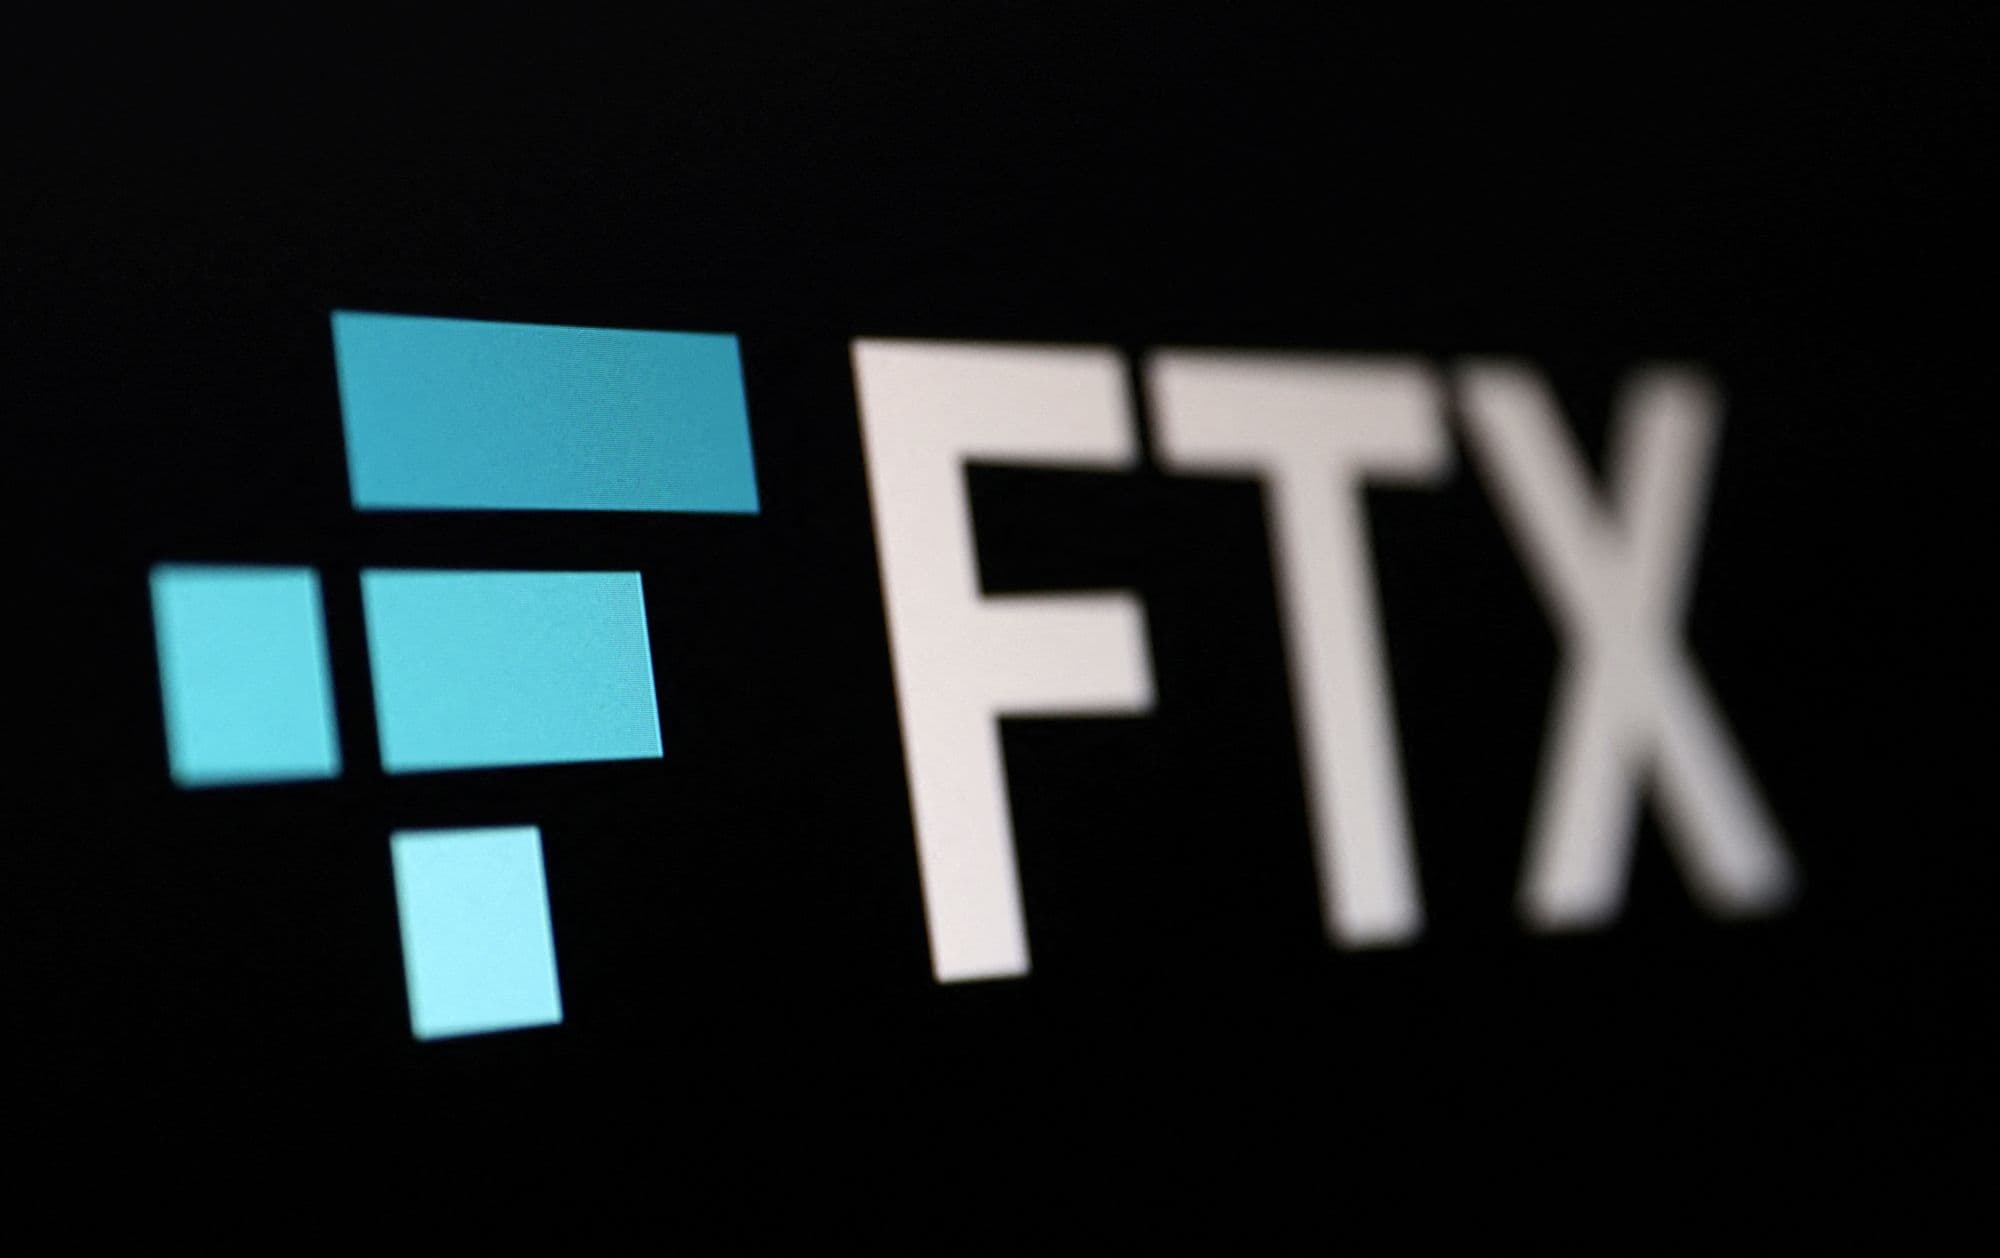 FTX Hacked, with around $600 Million Missing from Users